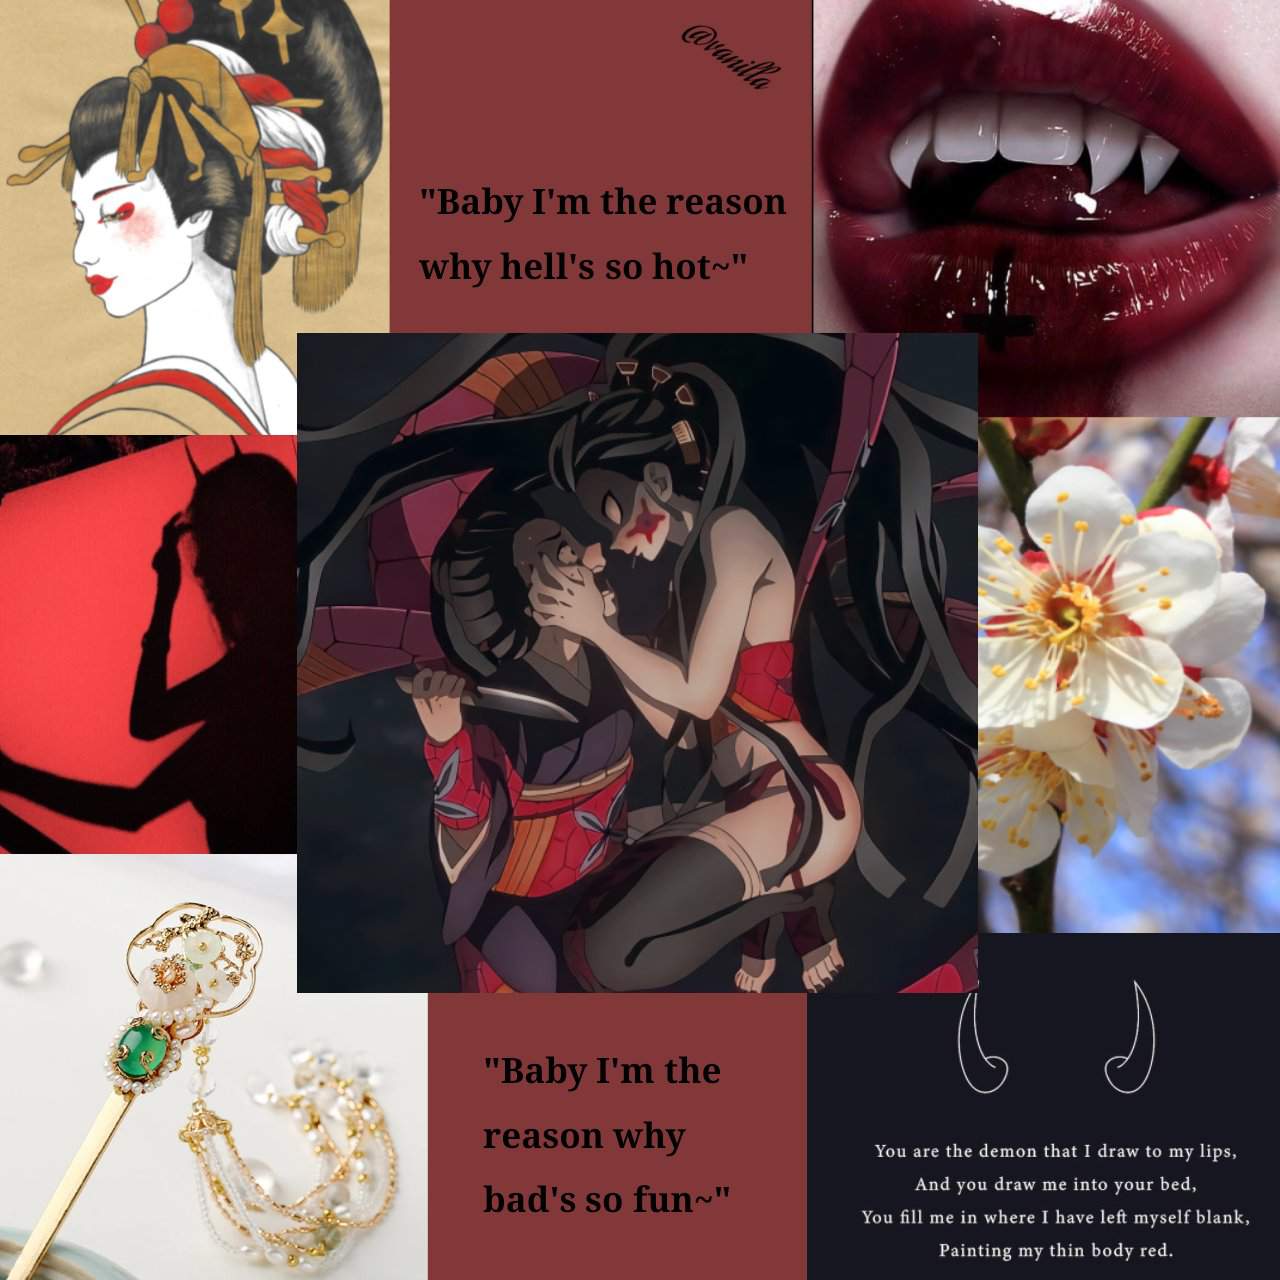 Collage of images including a geisha, a demon, a quote, and a flower - Demon Slayer